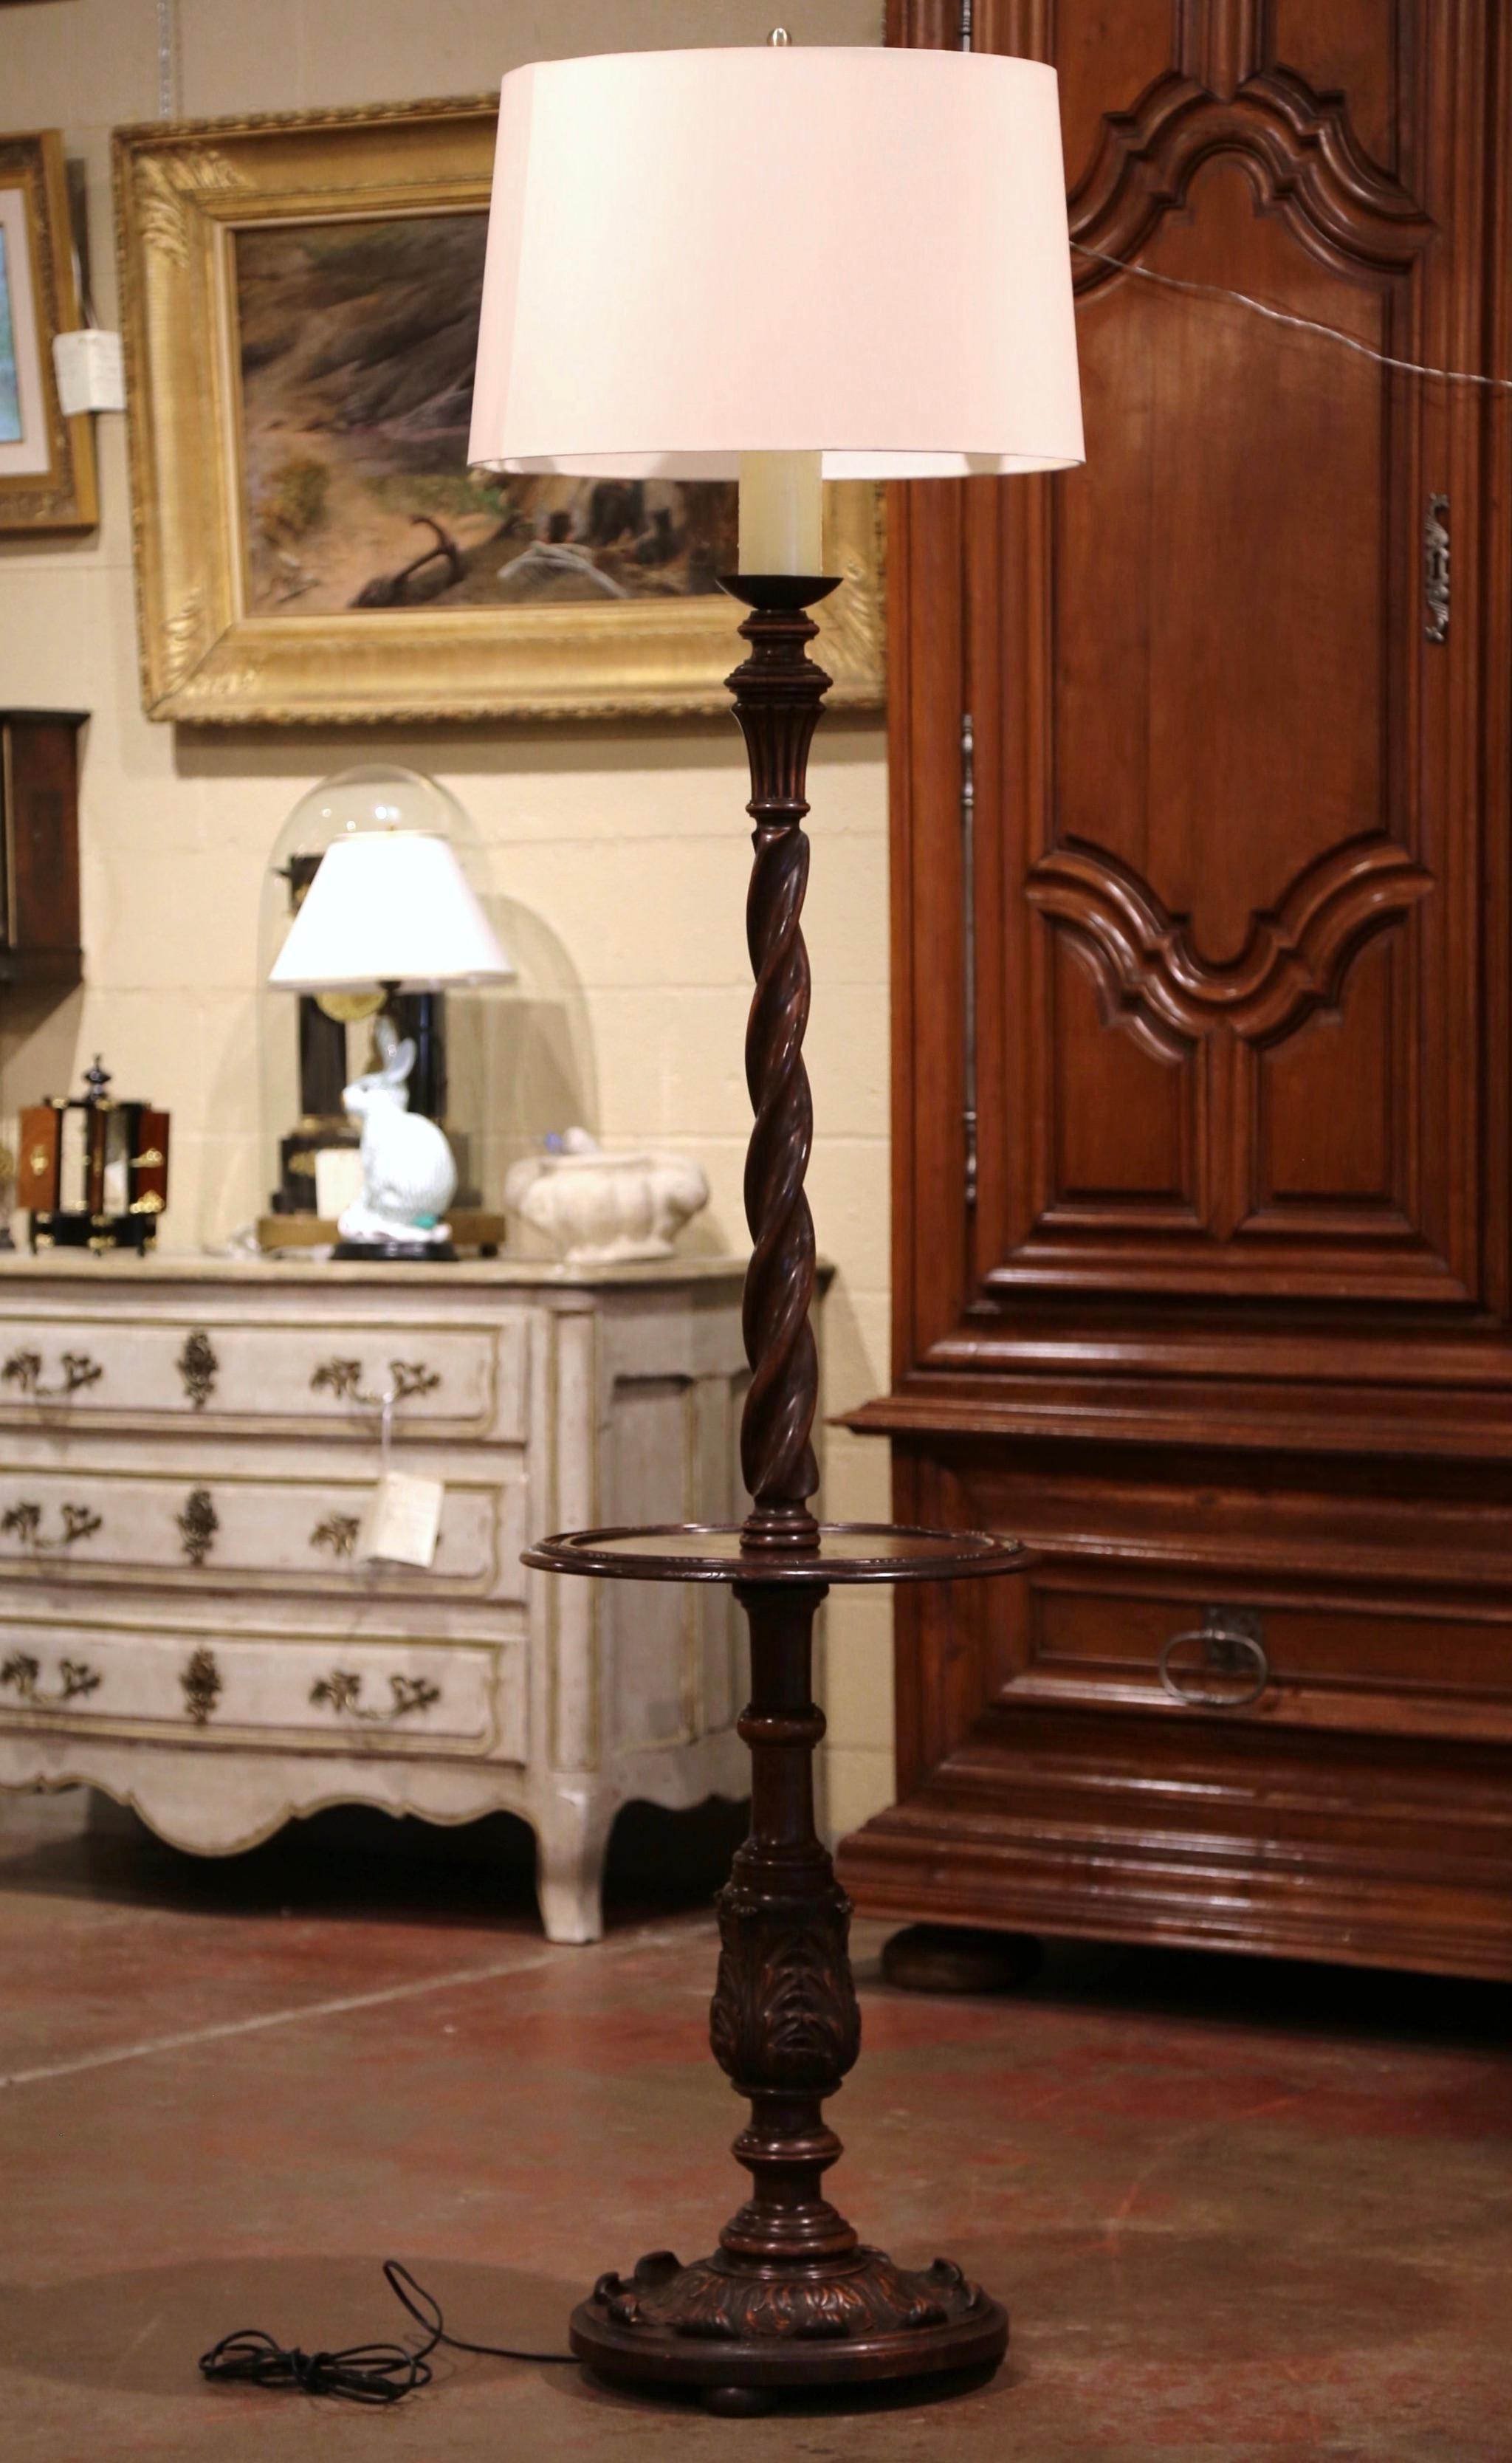 Patinated Early 20th Century French Carved and Barley Twist Floor Lamp with Attached Table